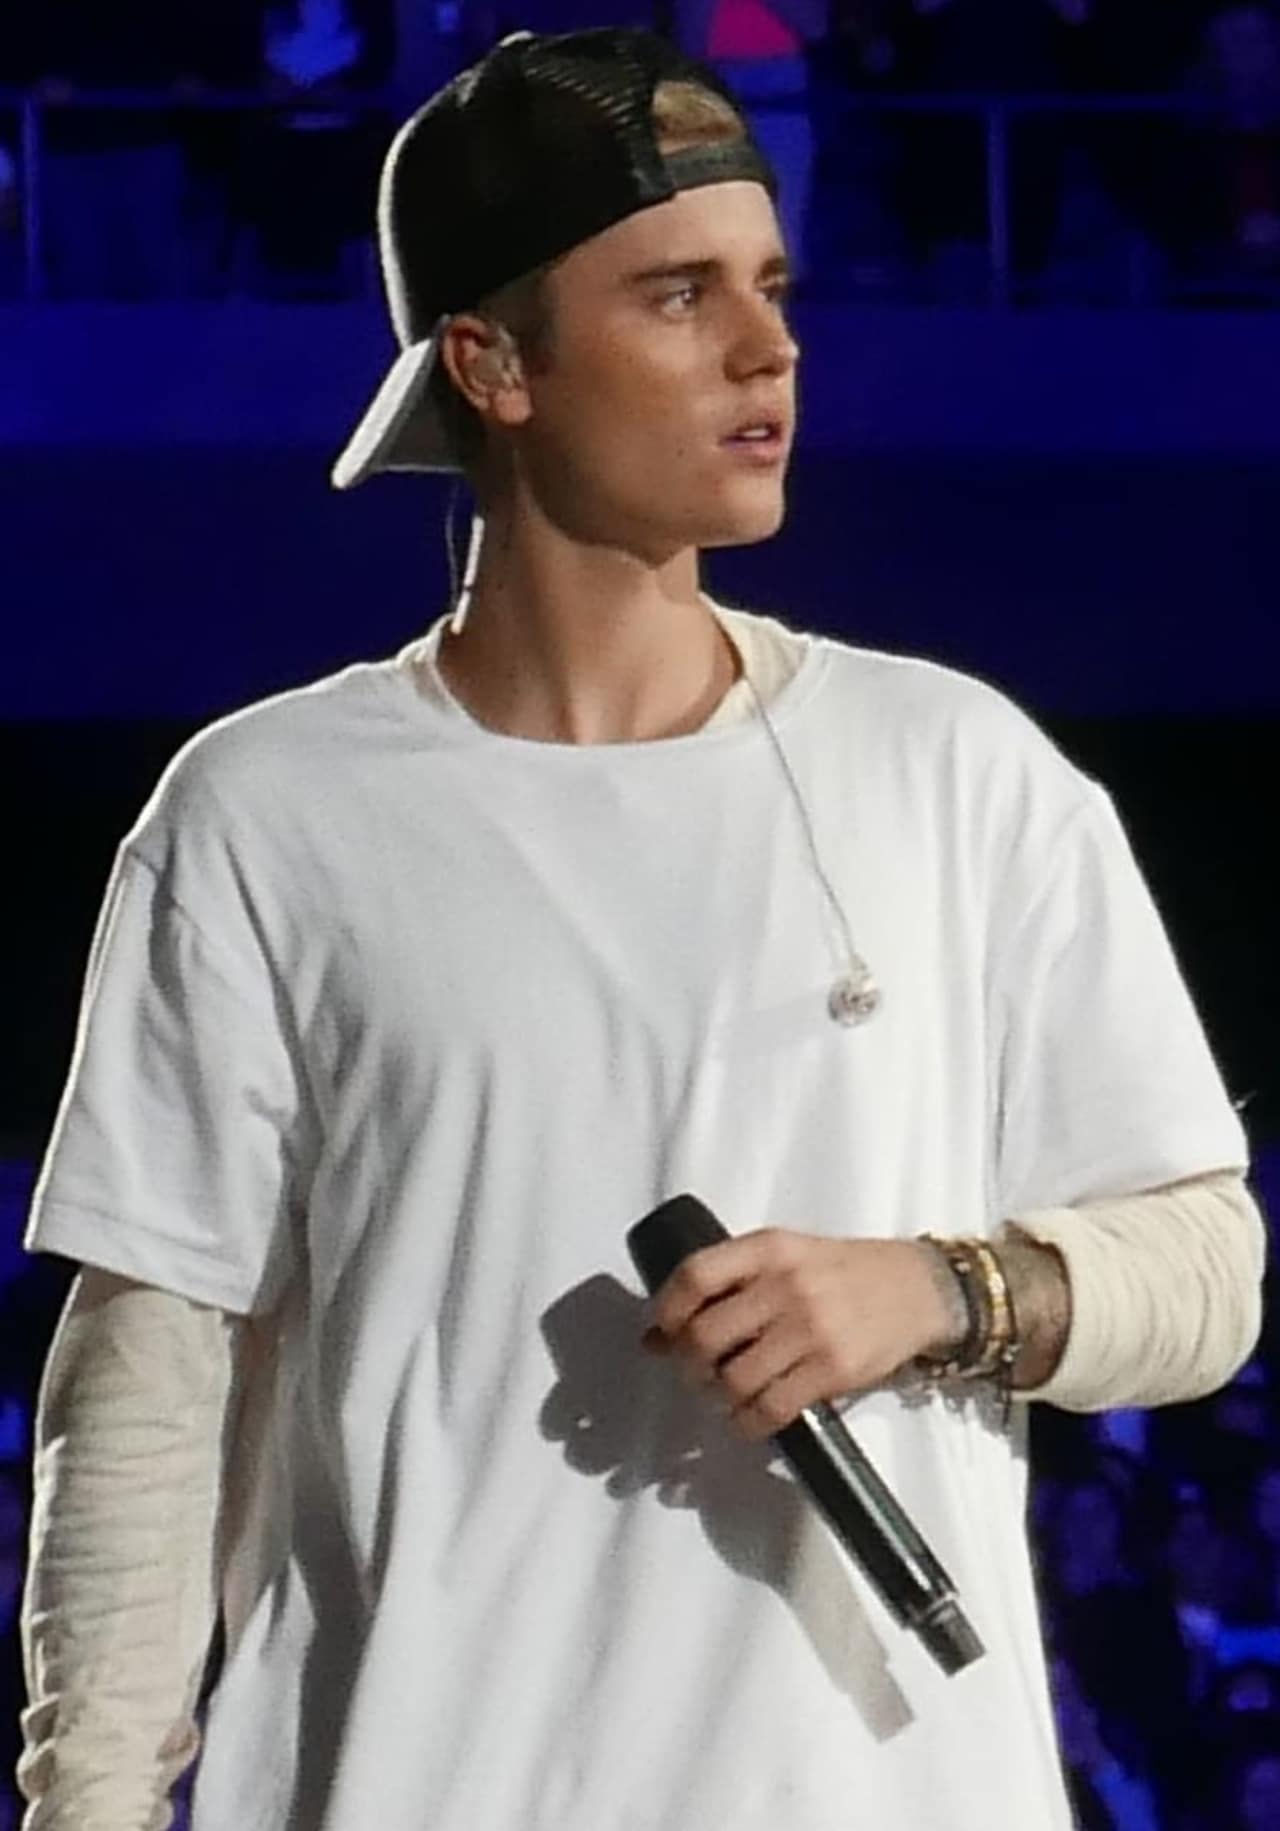 Canadian singer/songwriter Justin Bieber made one of his very first public appearances right here in the Hudson Valley. The Biebs, then 15, sang to an adoring crowd at Splashdown Beach, a water park in Fishkill in 2009.